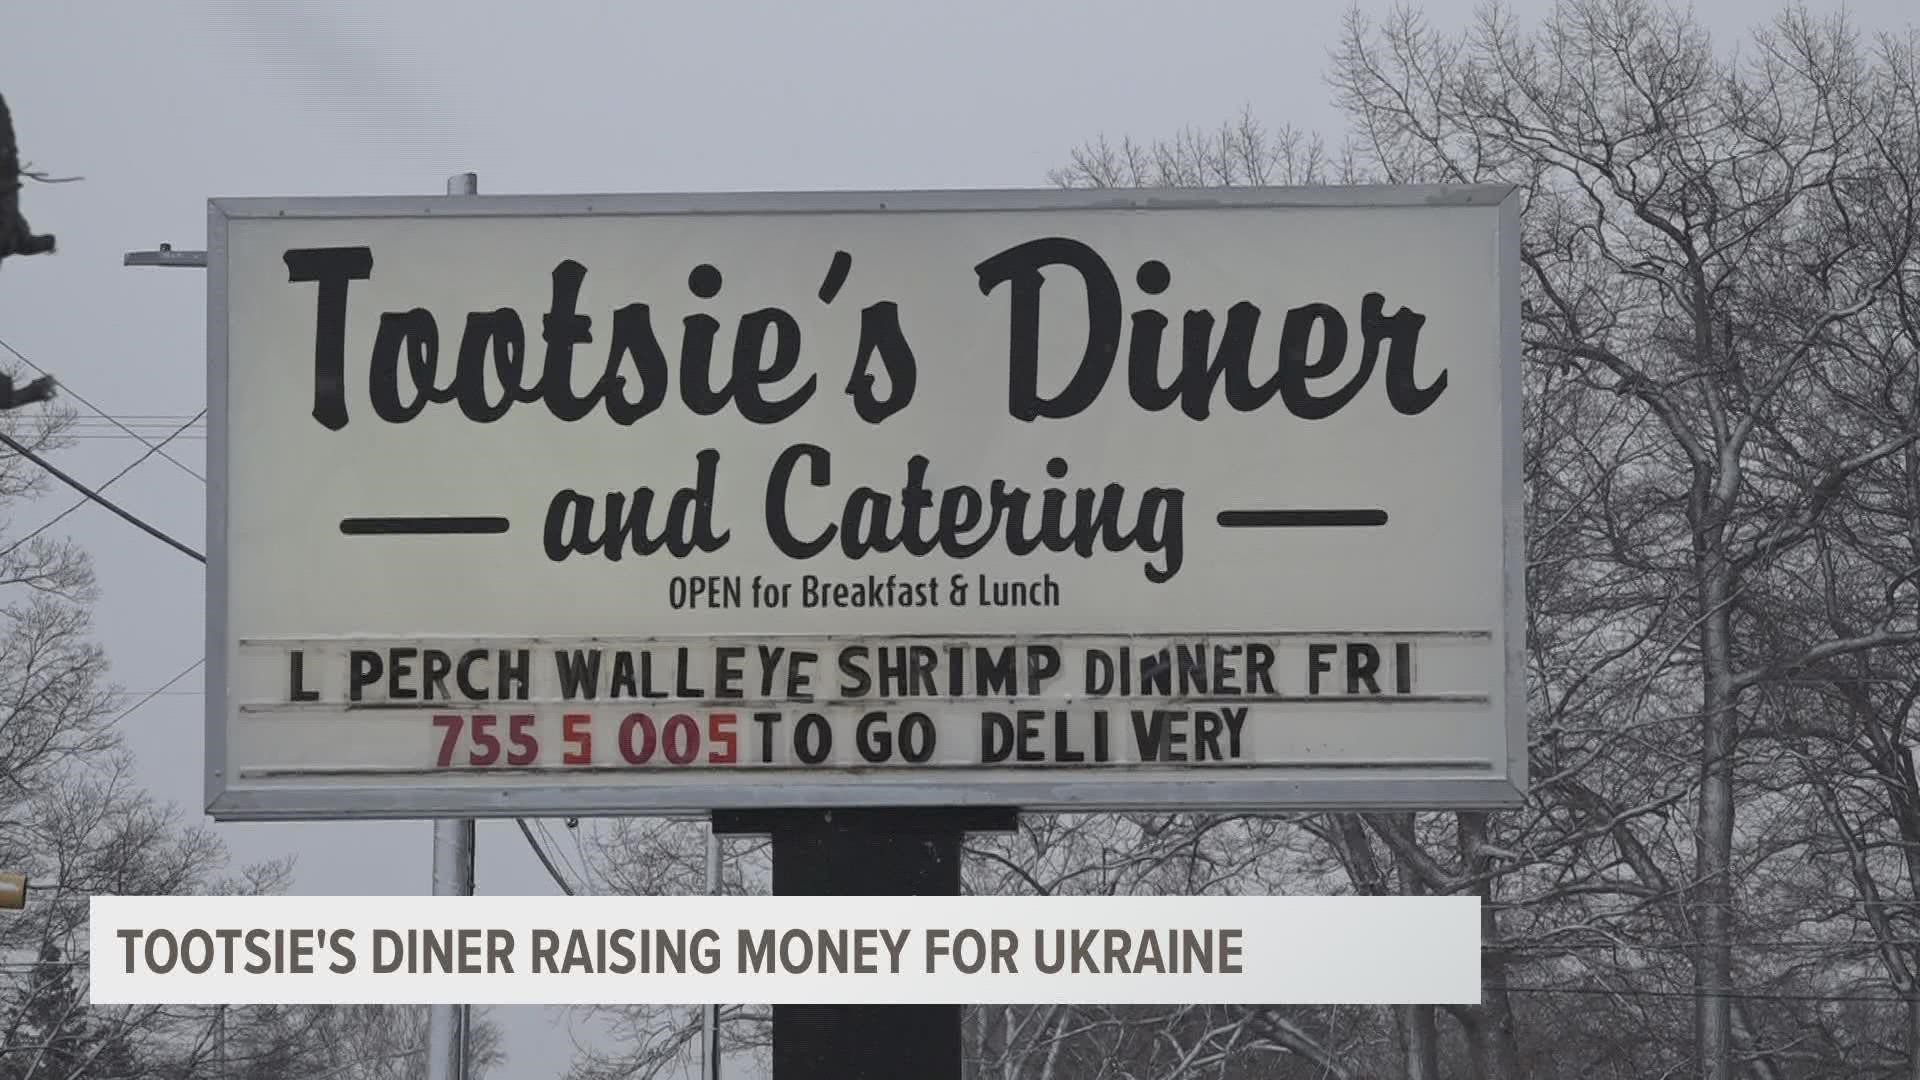 The restaurant will donate 100% of sales from its Polish sausage to Ukraine.